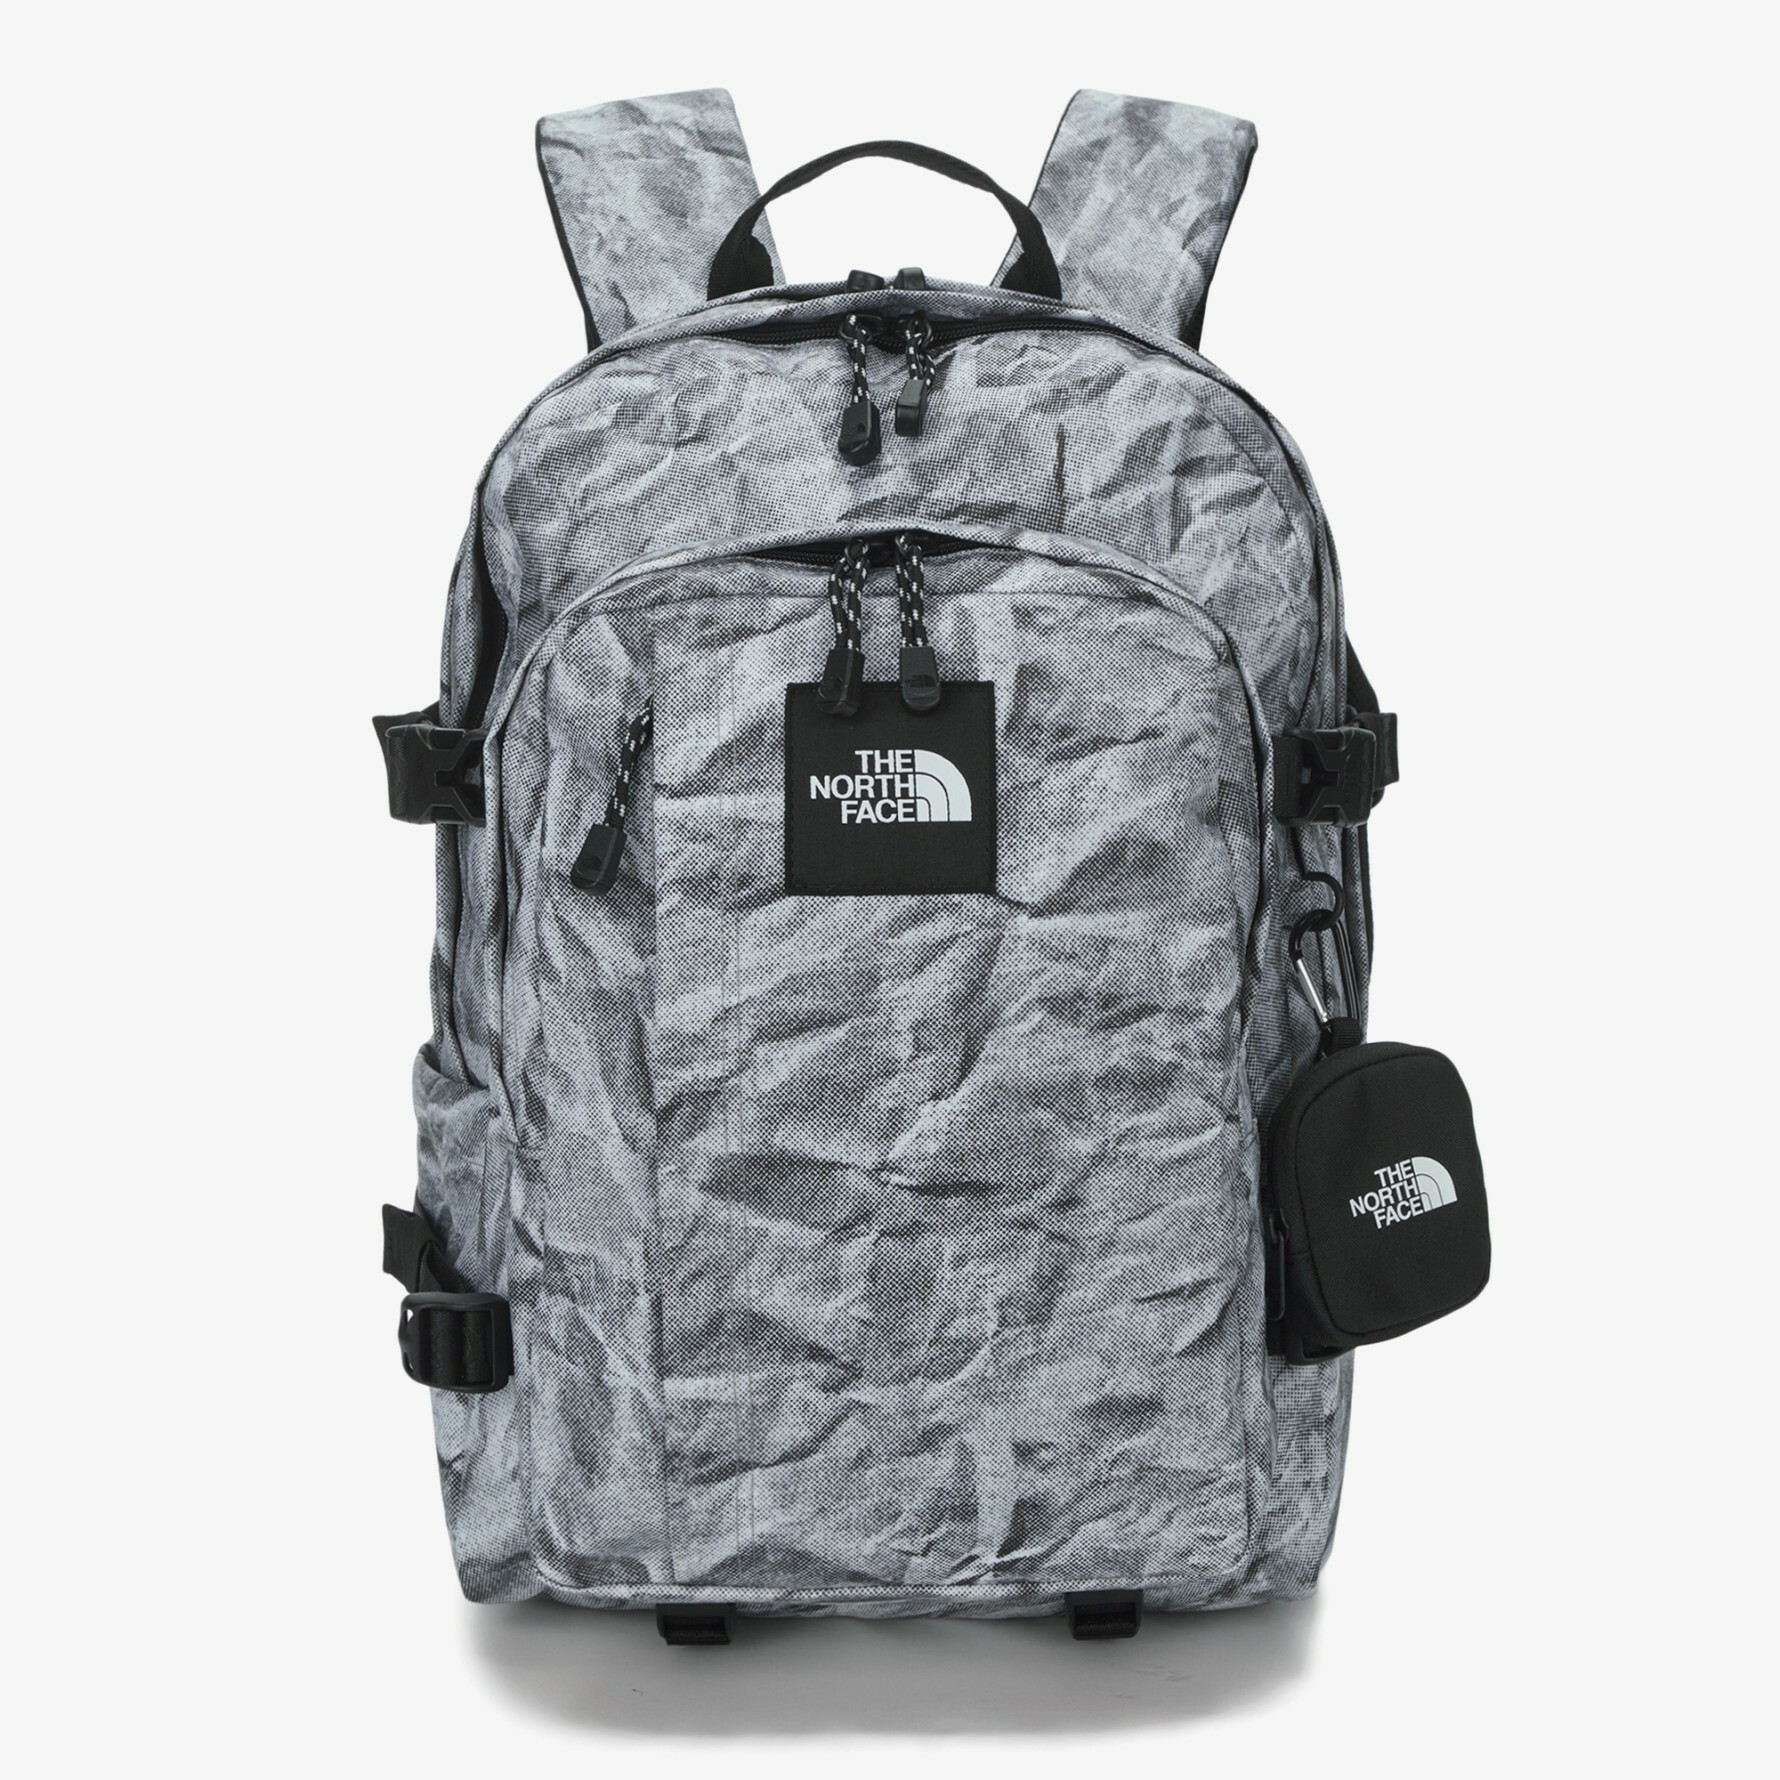 KR The North Face White Label New Cancun Backpack Gray